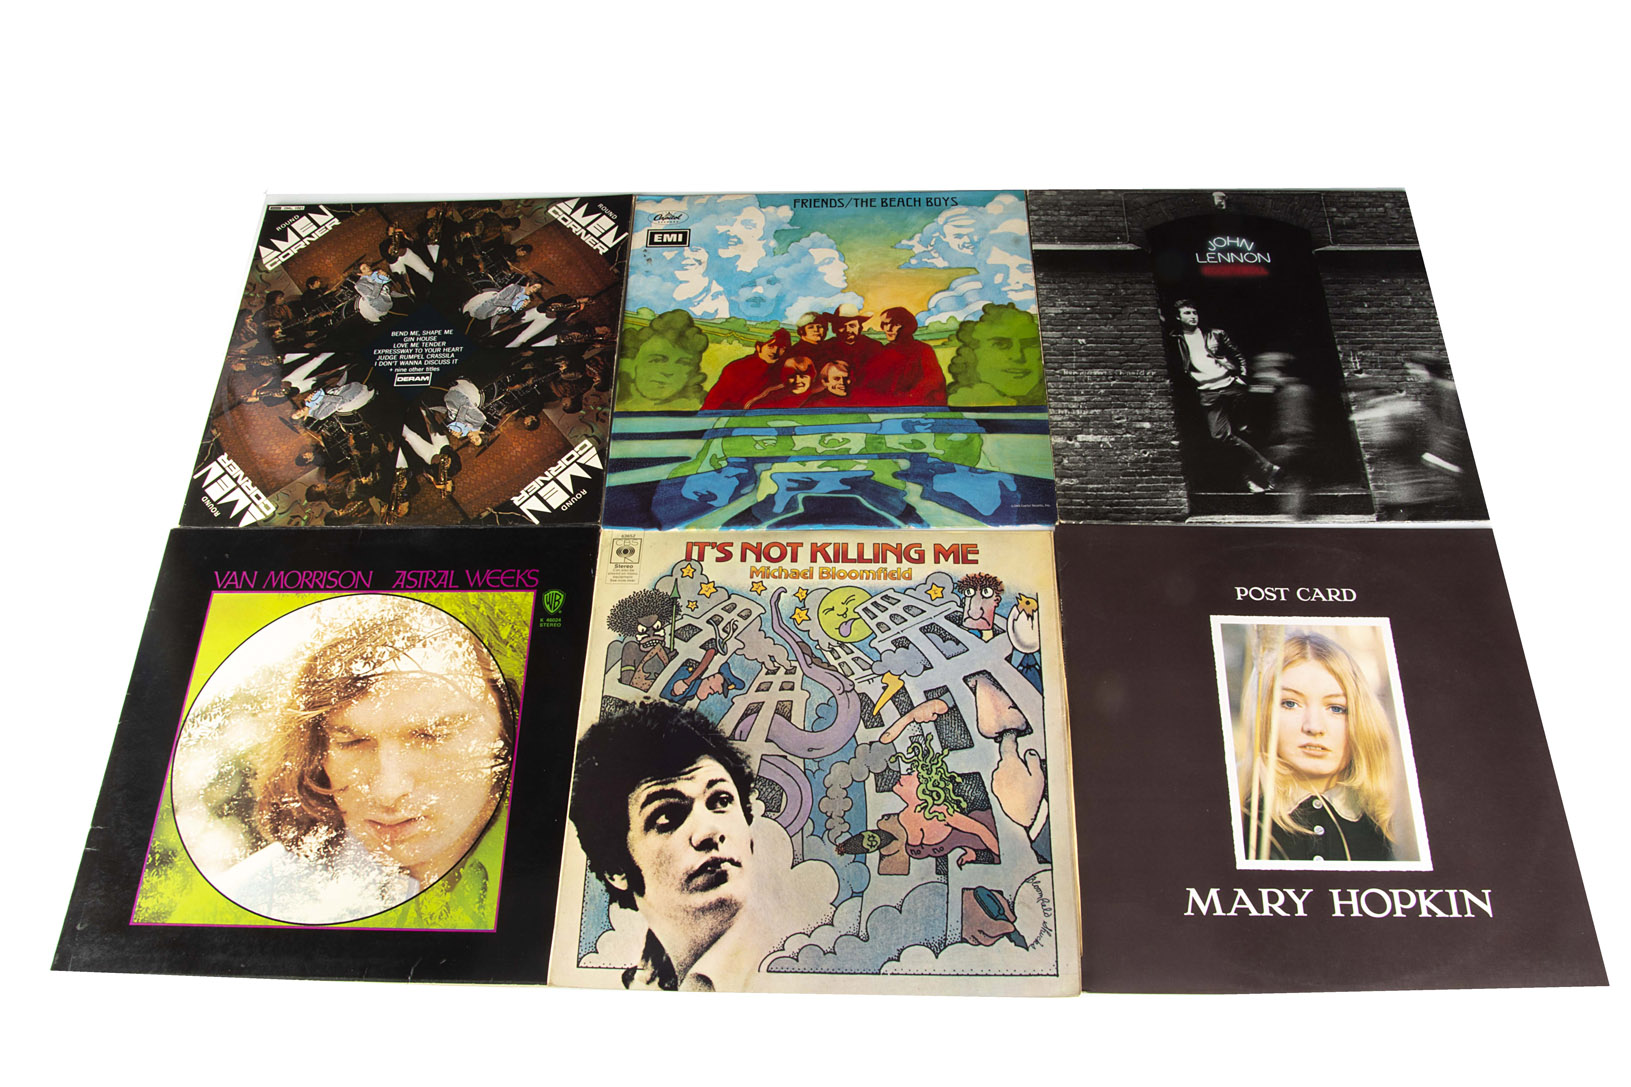 Sixties LPs, twelve UK Release albums of mainly Sixties artists including The Beach Boys (Pet - Image 2 of 2